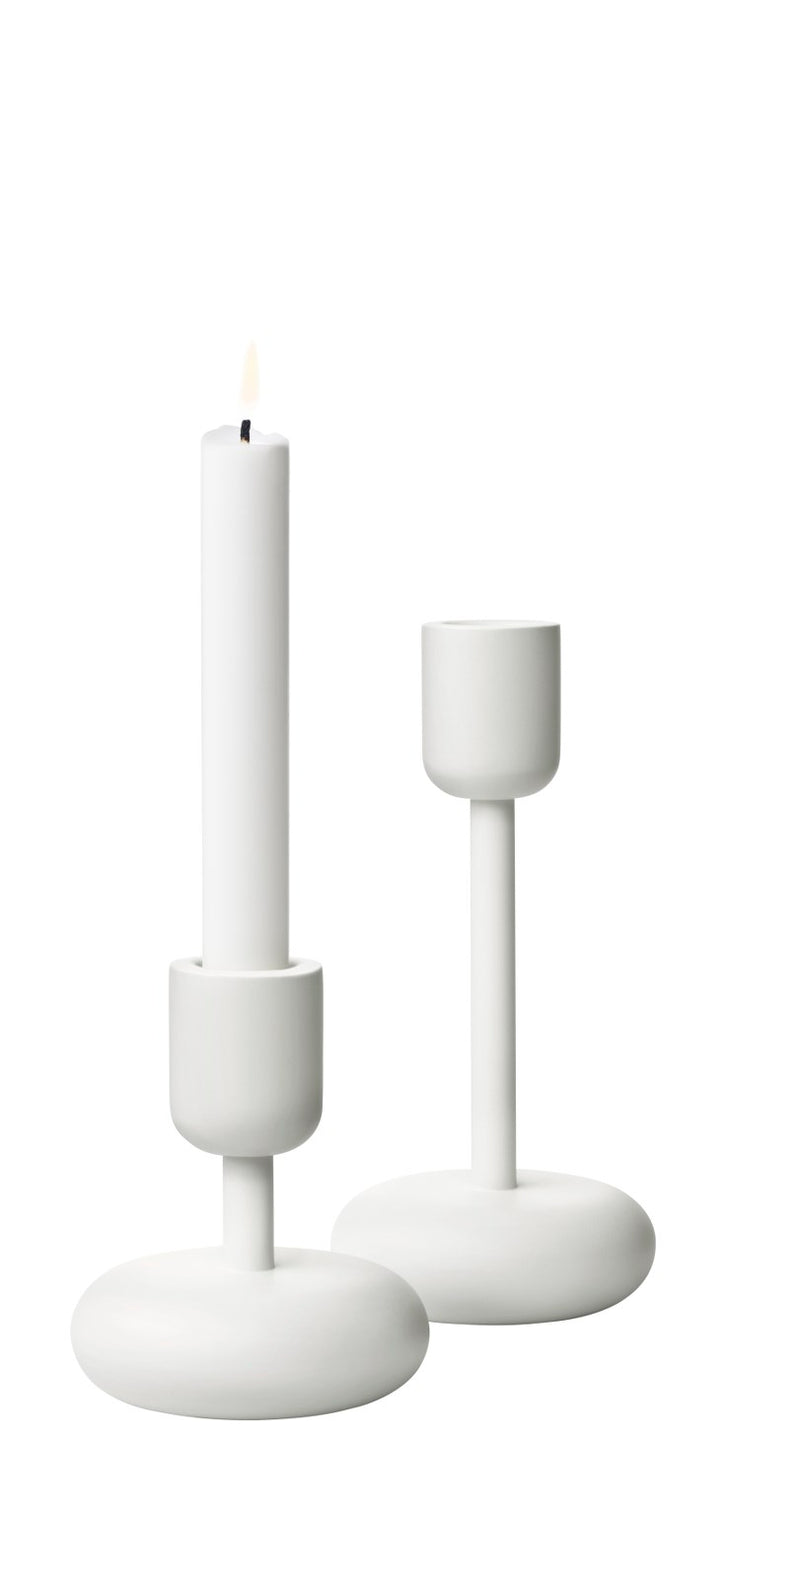 media image for Nappula Candleholder in Various Sizes & Colors design by Matti Klenell for Iittala 210